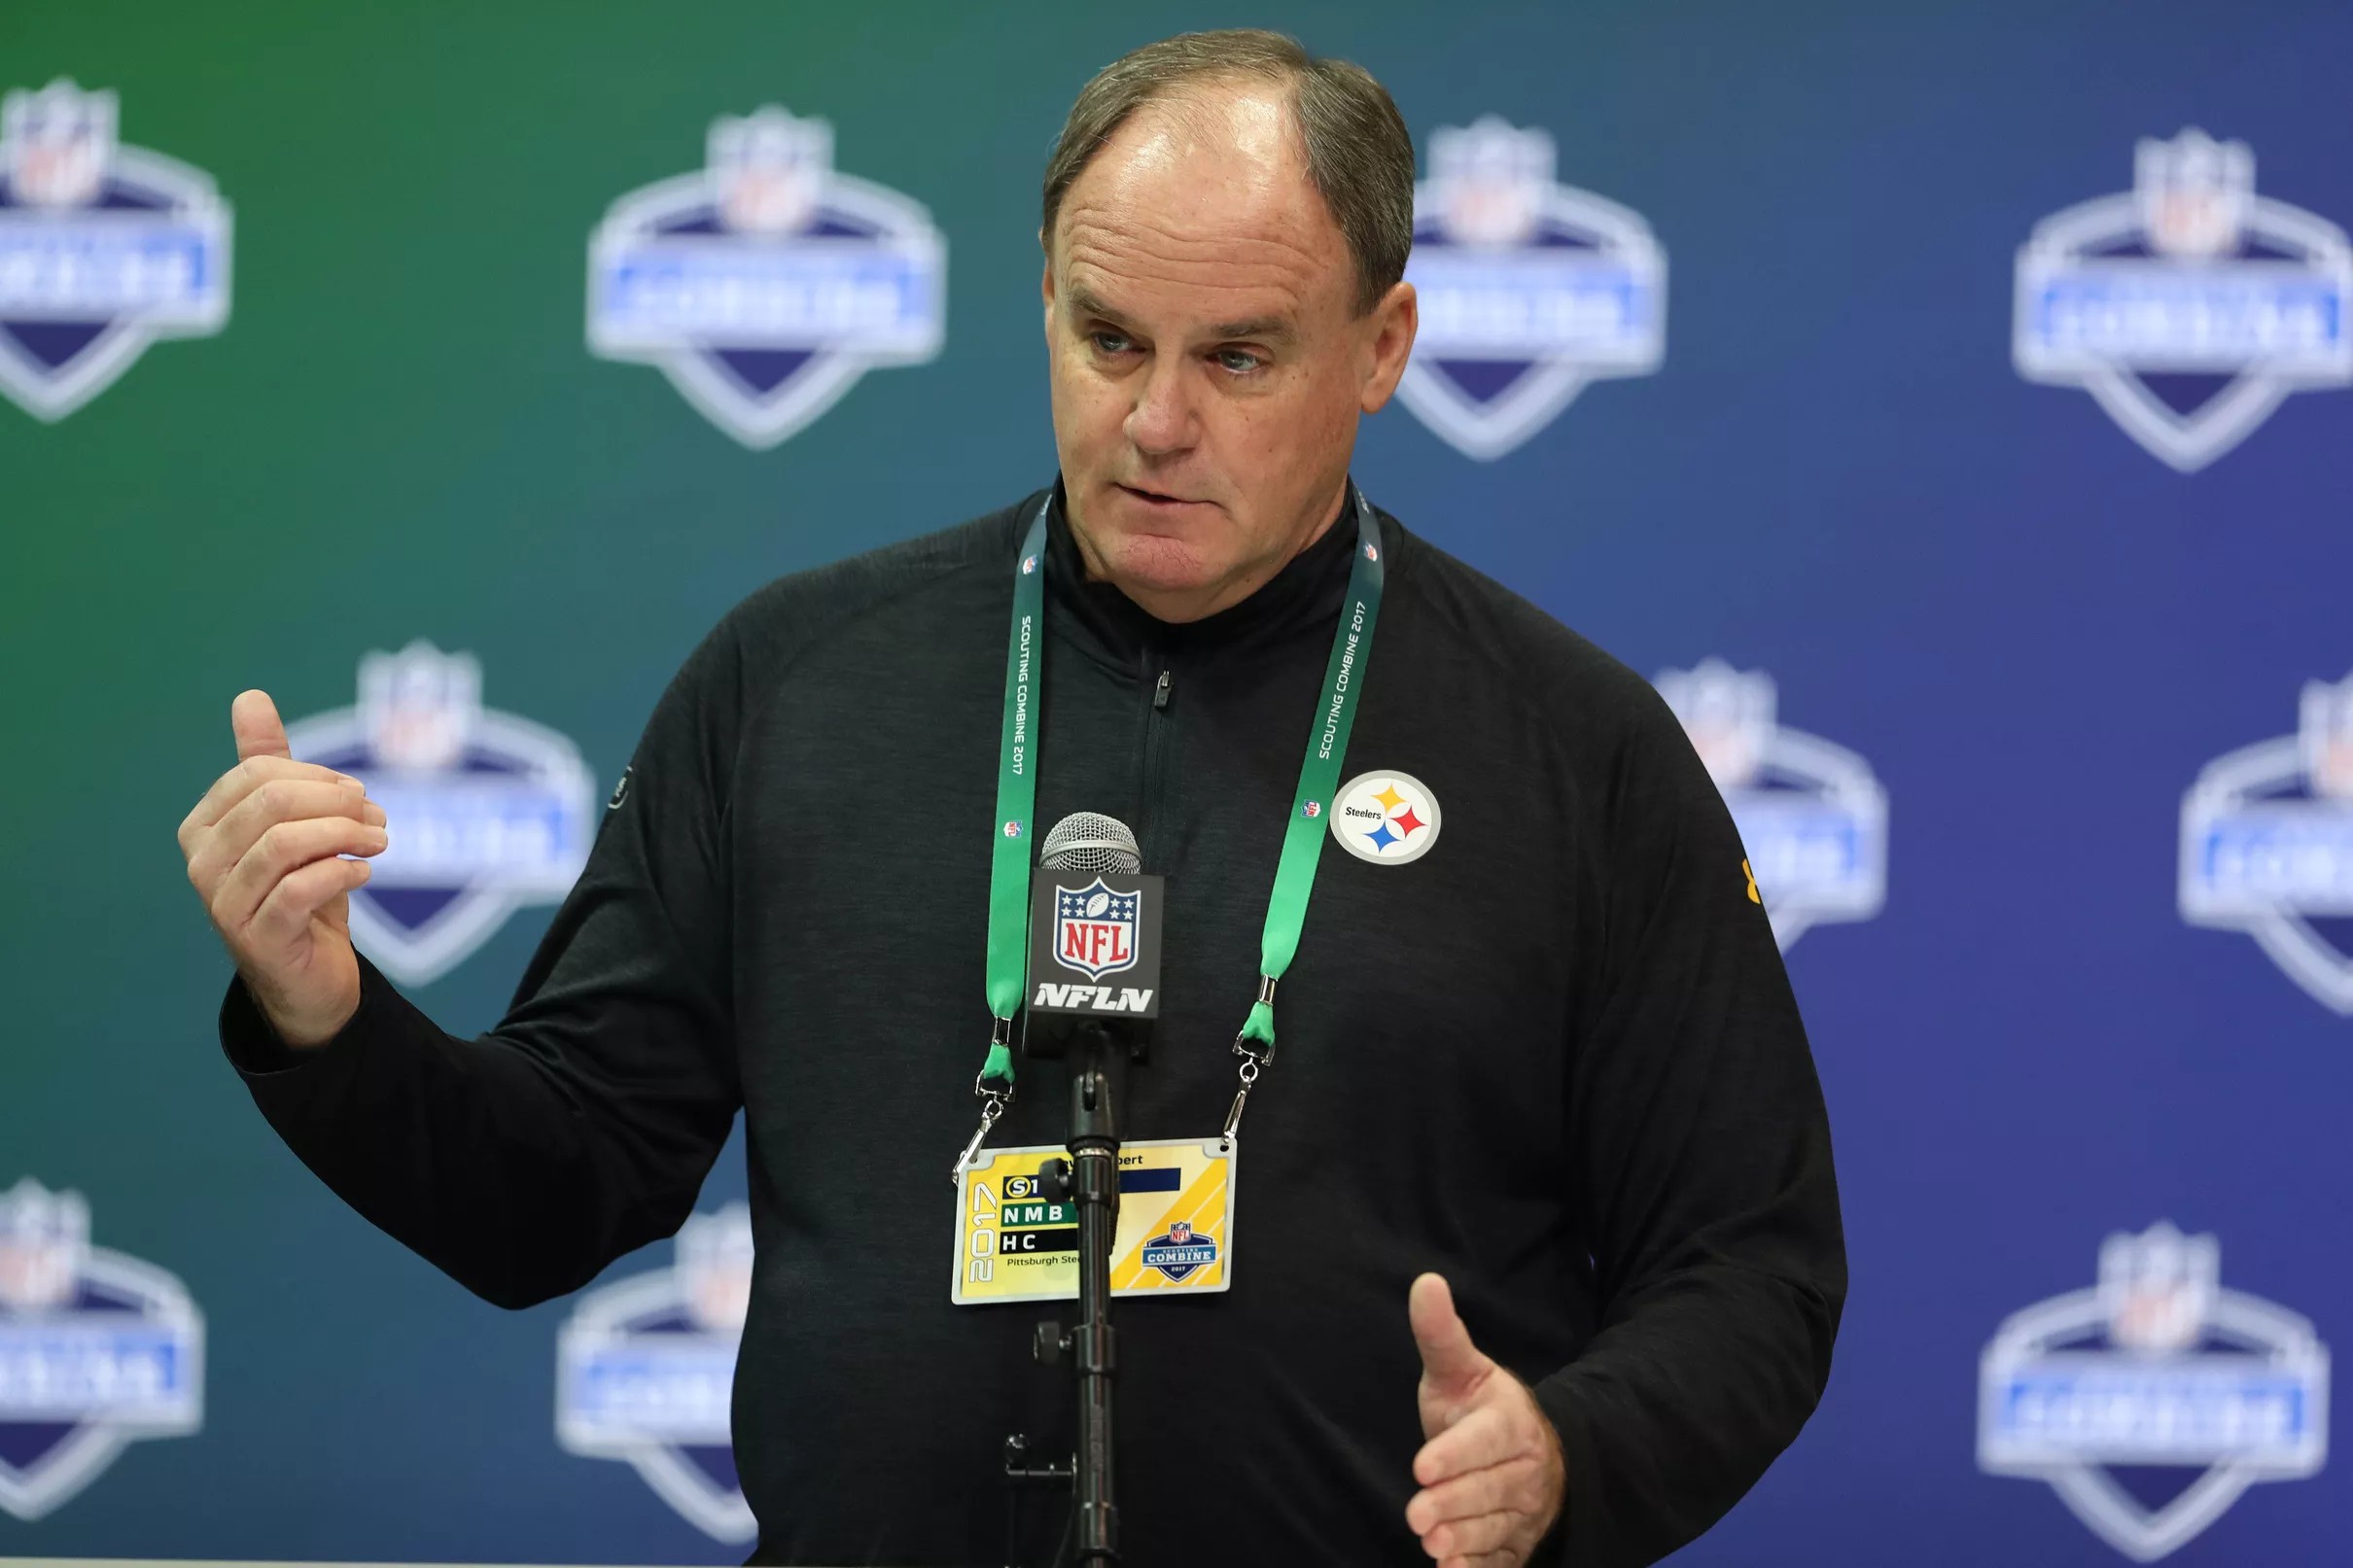 The projected 2018 NFL Salary Cap could help the Steelers make key